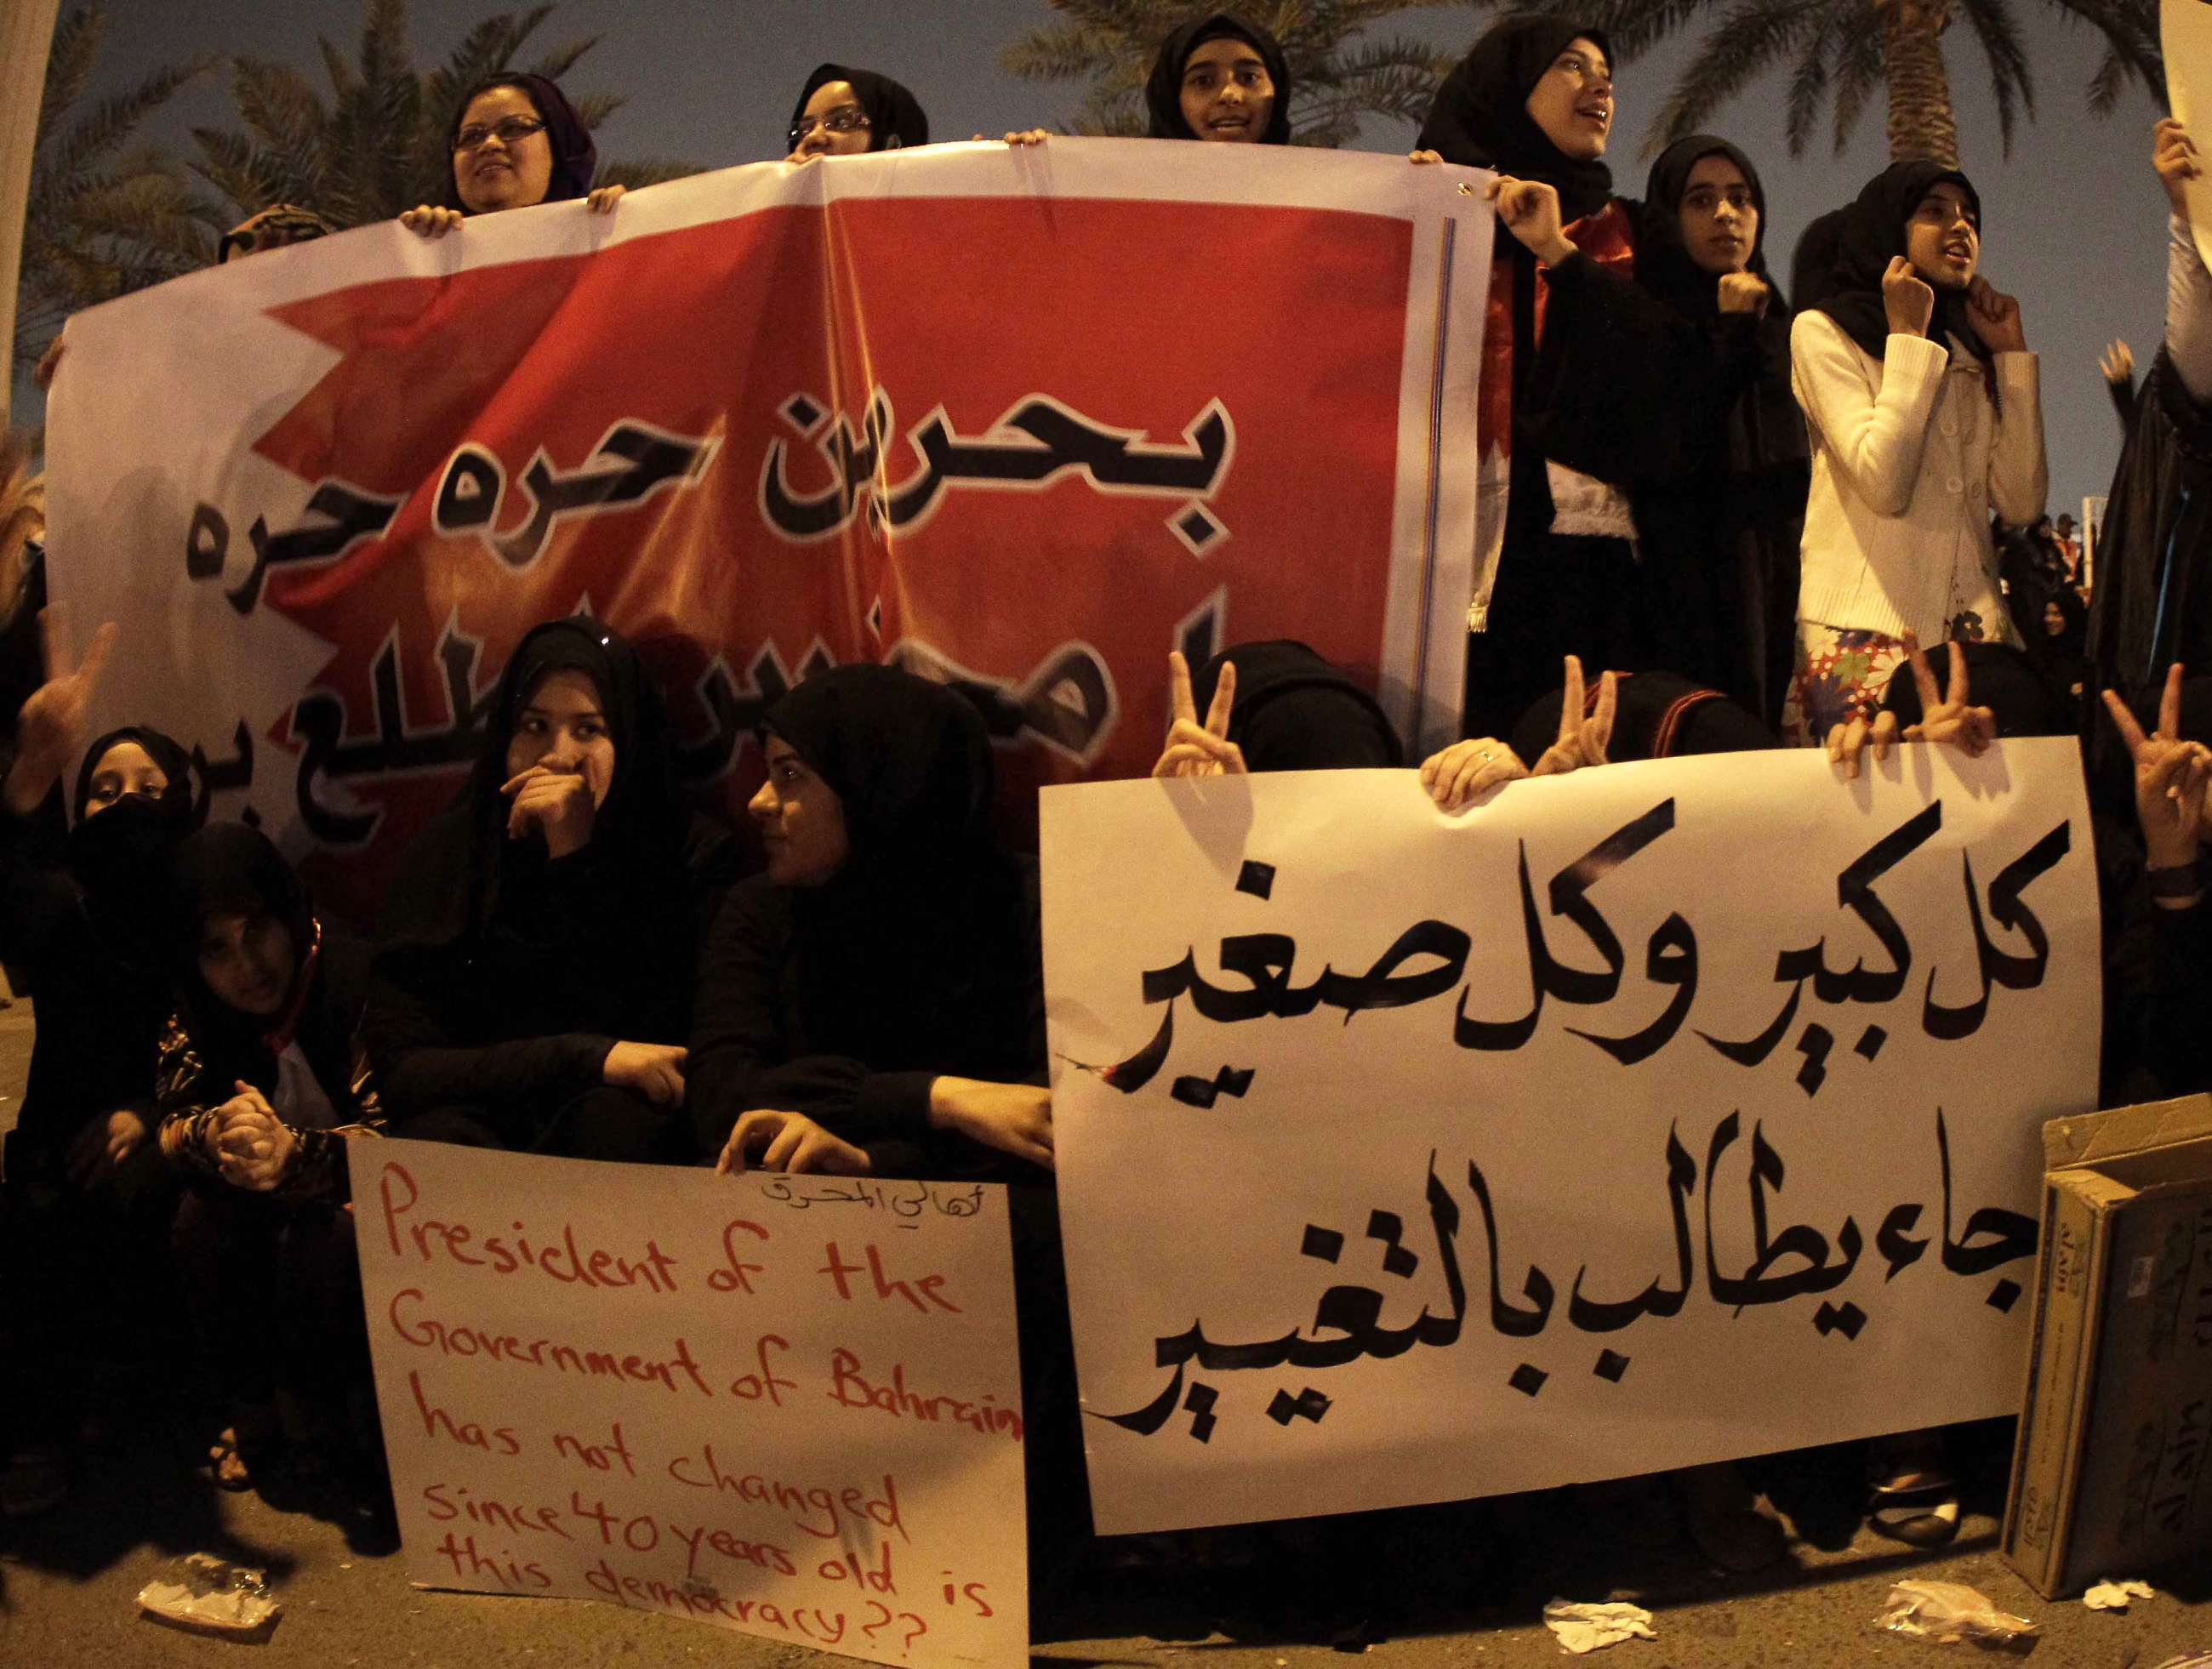 Bahraini anti-government protesters hold signs calling for freedom and change as they gather at Pearl Square in Manama on 16 February 2011.